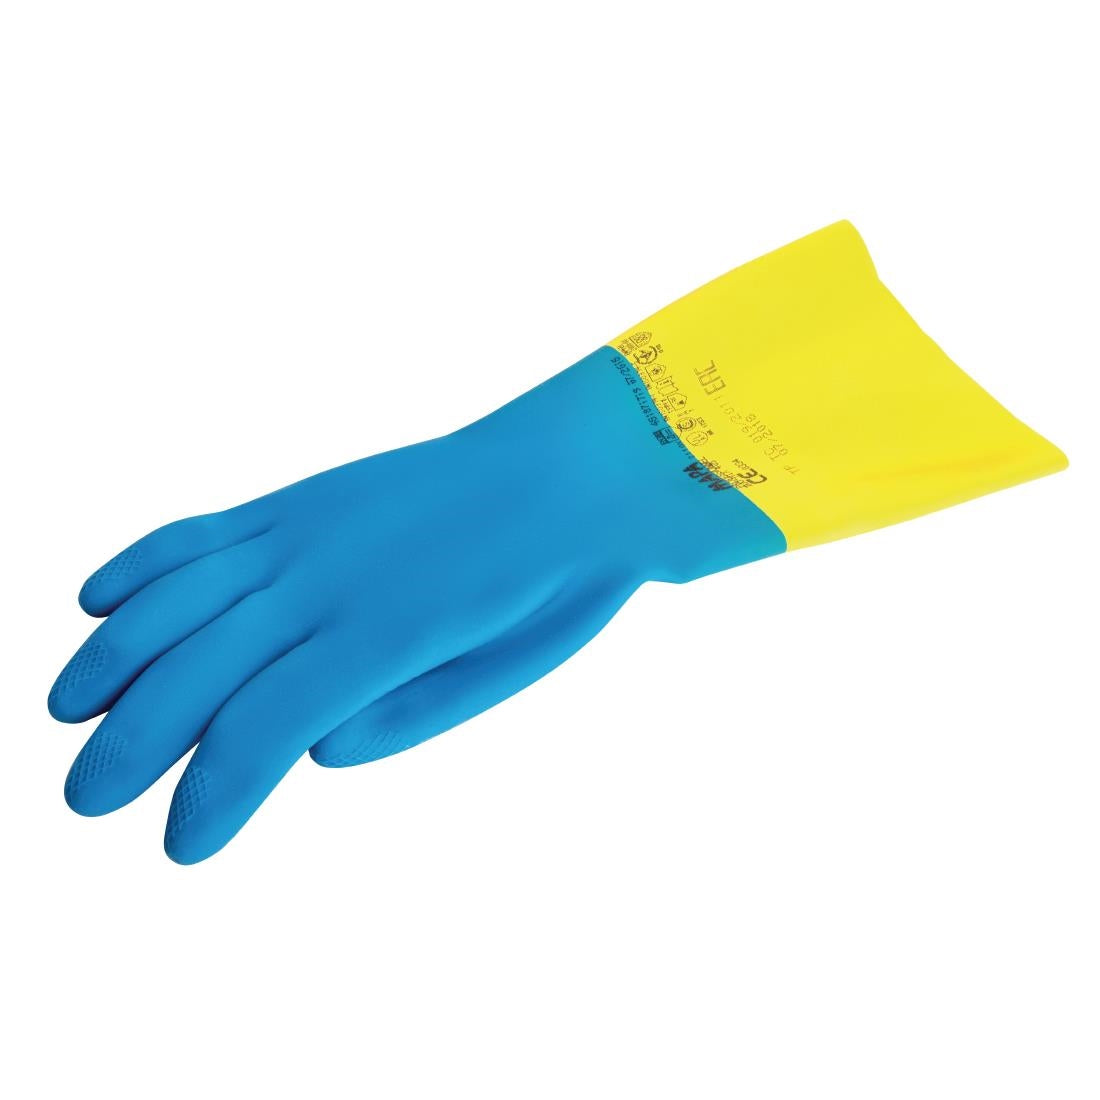 MAPA Alto 405 Liquid-Proof Heavy-Duty Janitorial Gloves Blue and Yellow JD Catering Equipment Solutions Ltd